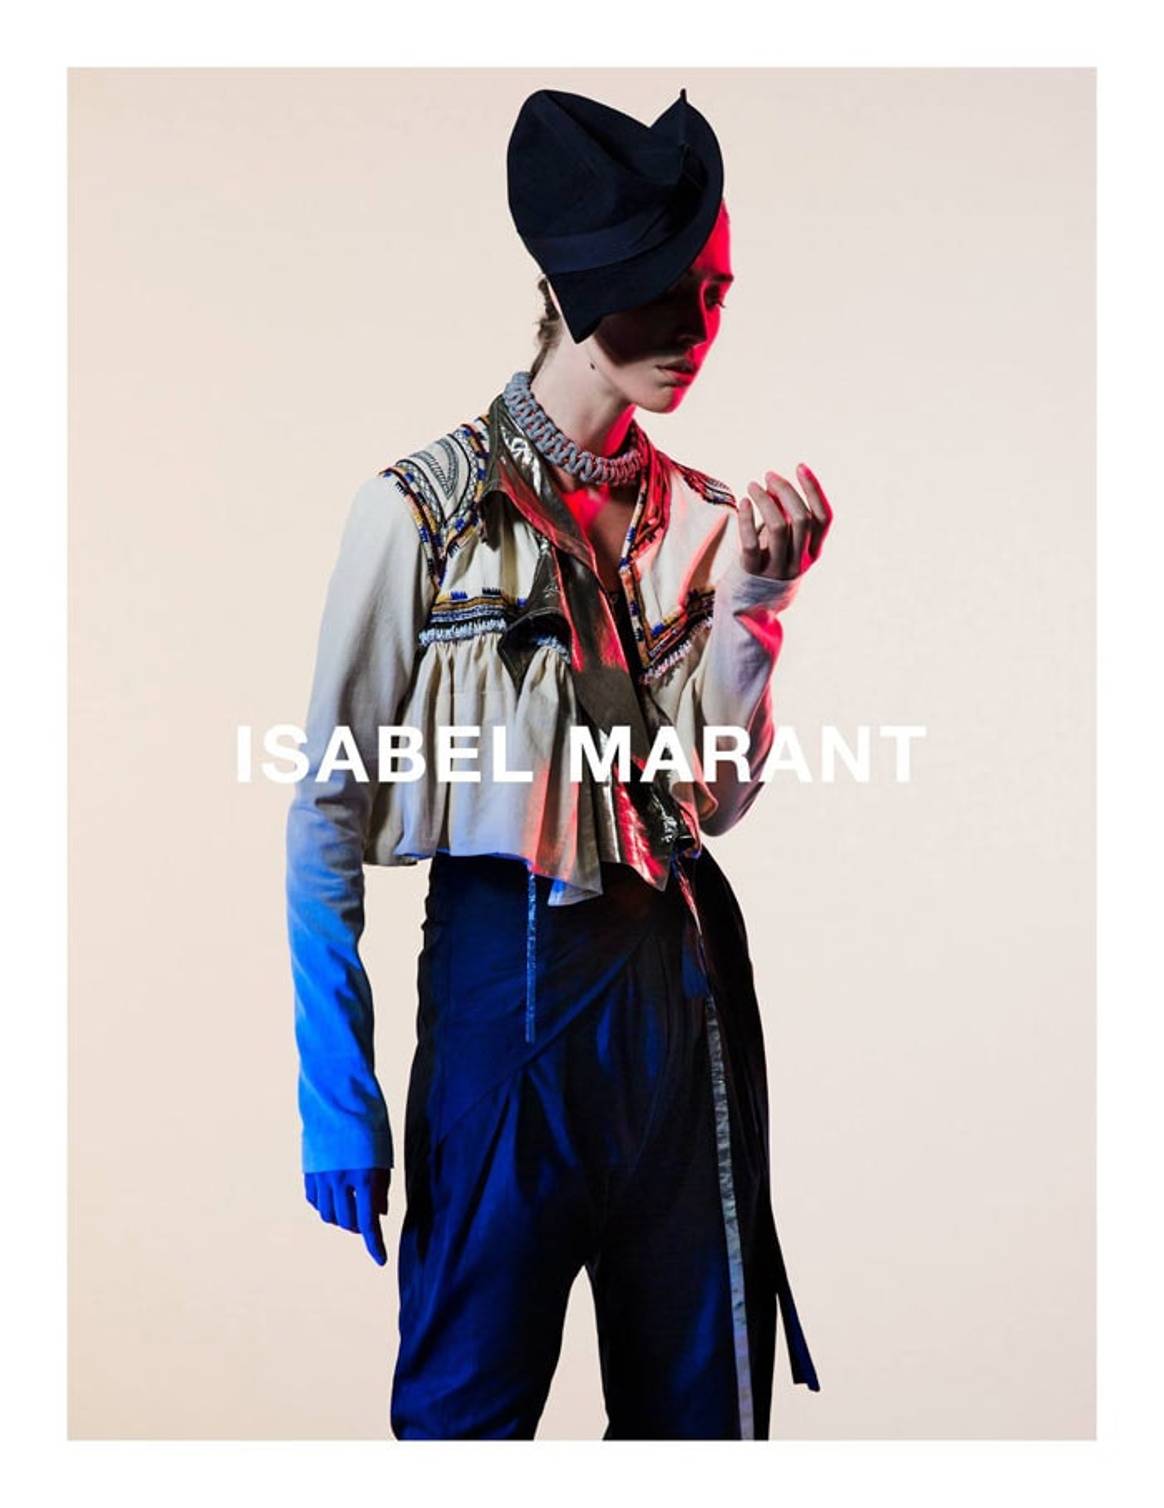 Yoox Net-a-Porter Group to launch Isabel Marant e-commerce site